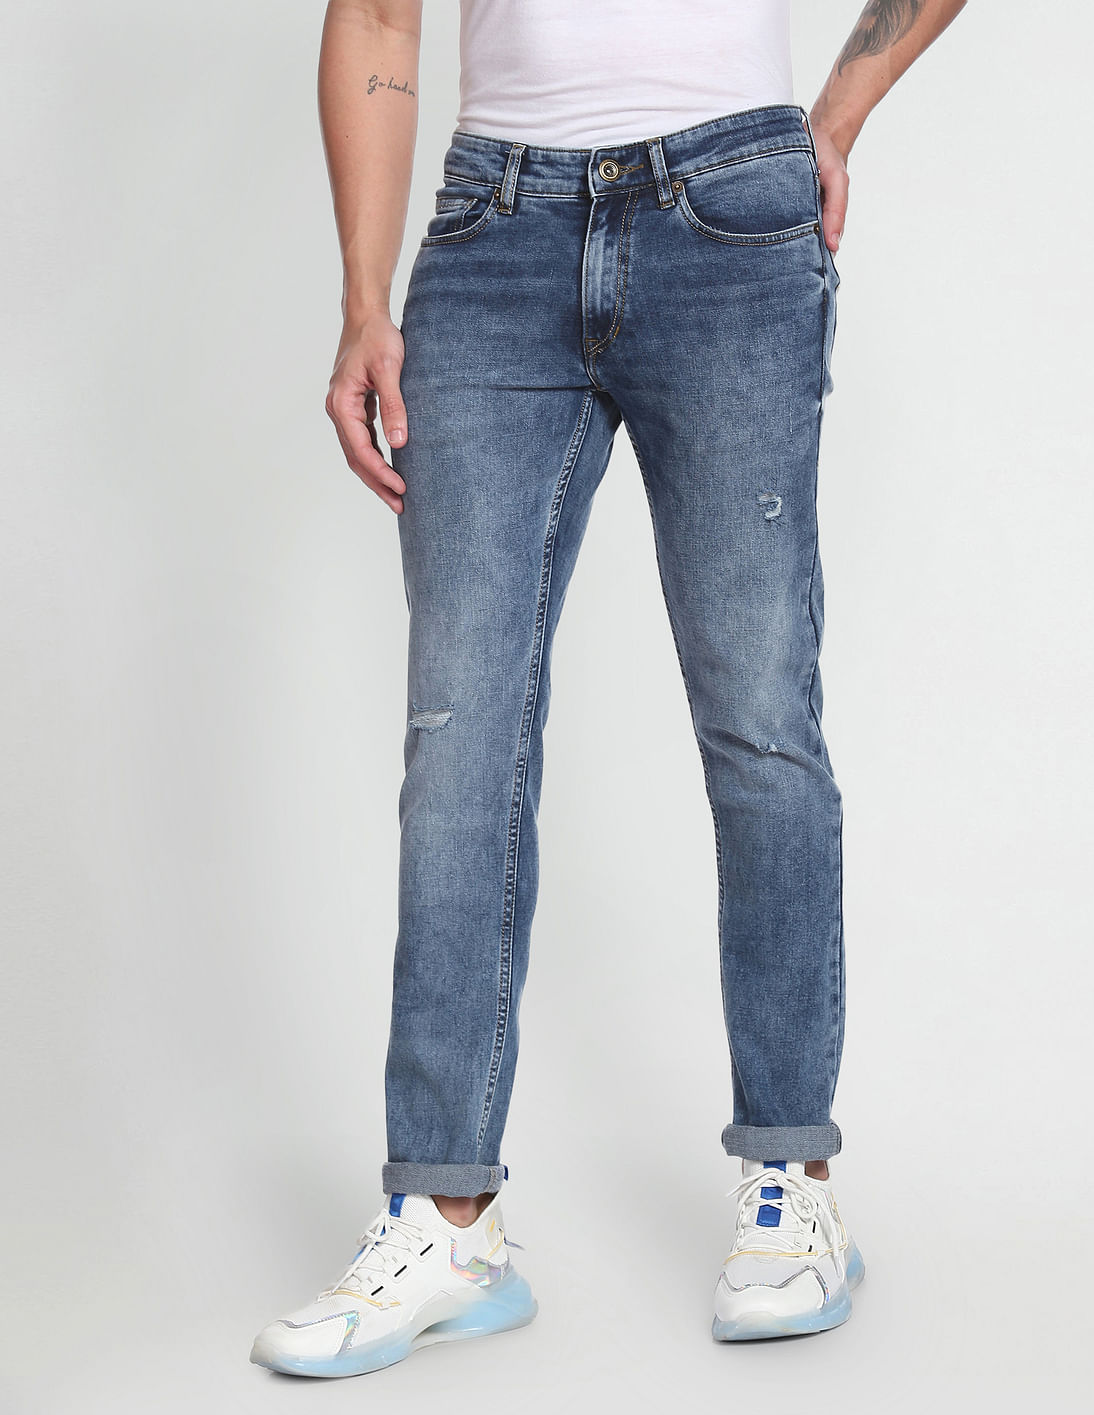 Buy Flying Machine Mid Rise Jackson Skinny Fit Jeans - NNNOW.com